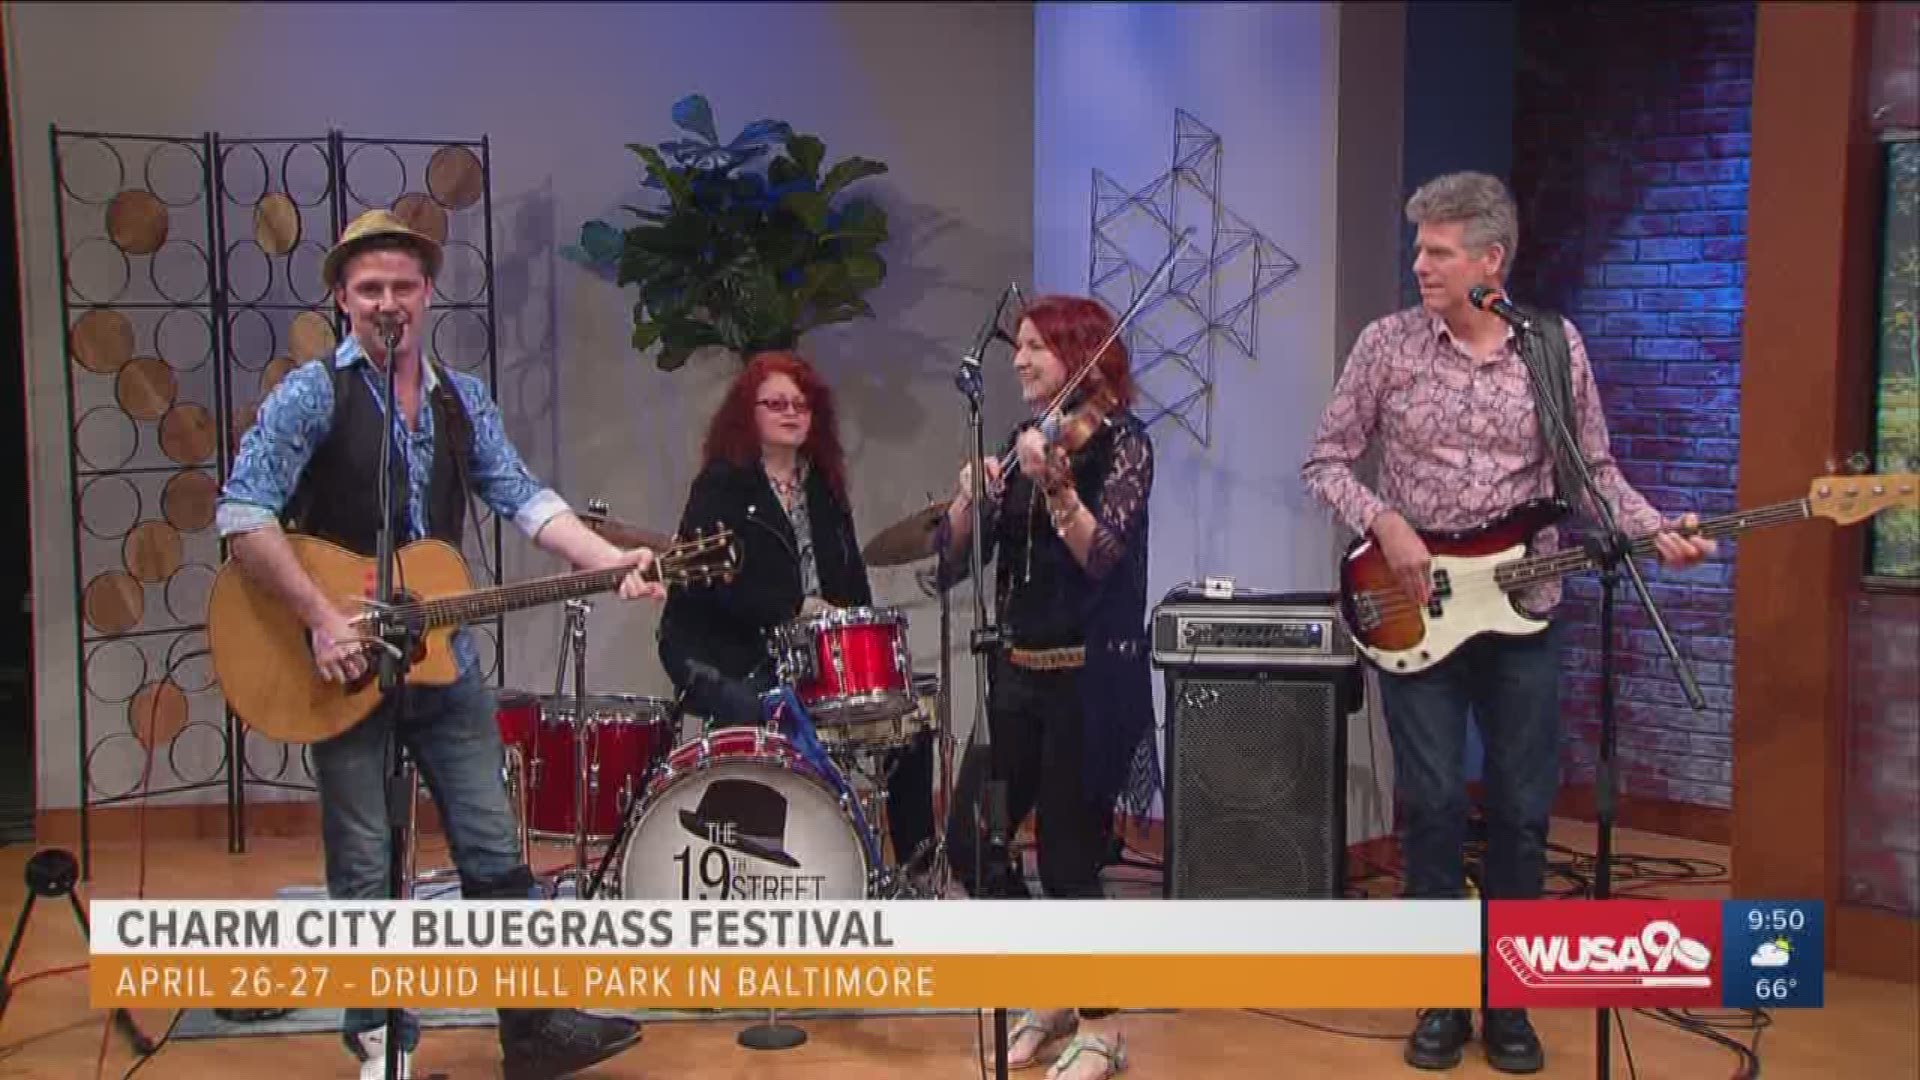 The 19th Street Band performs their song "Hill Billy Boy" which you can see them perform live at the Charm City Bluegrass Festival this weekend. Get your tickets online for this fun, family friendly, music filled event!